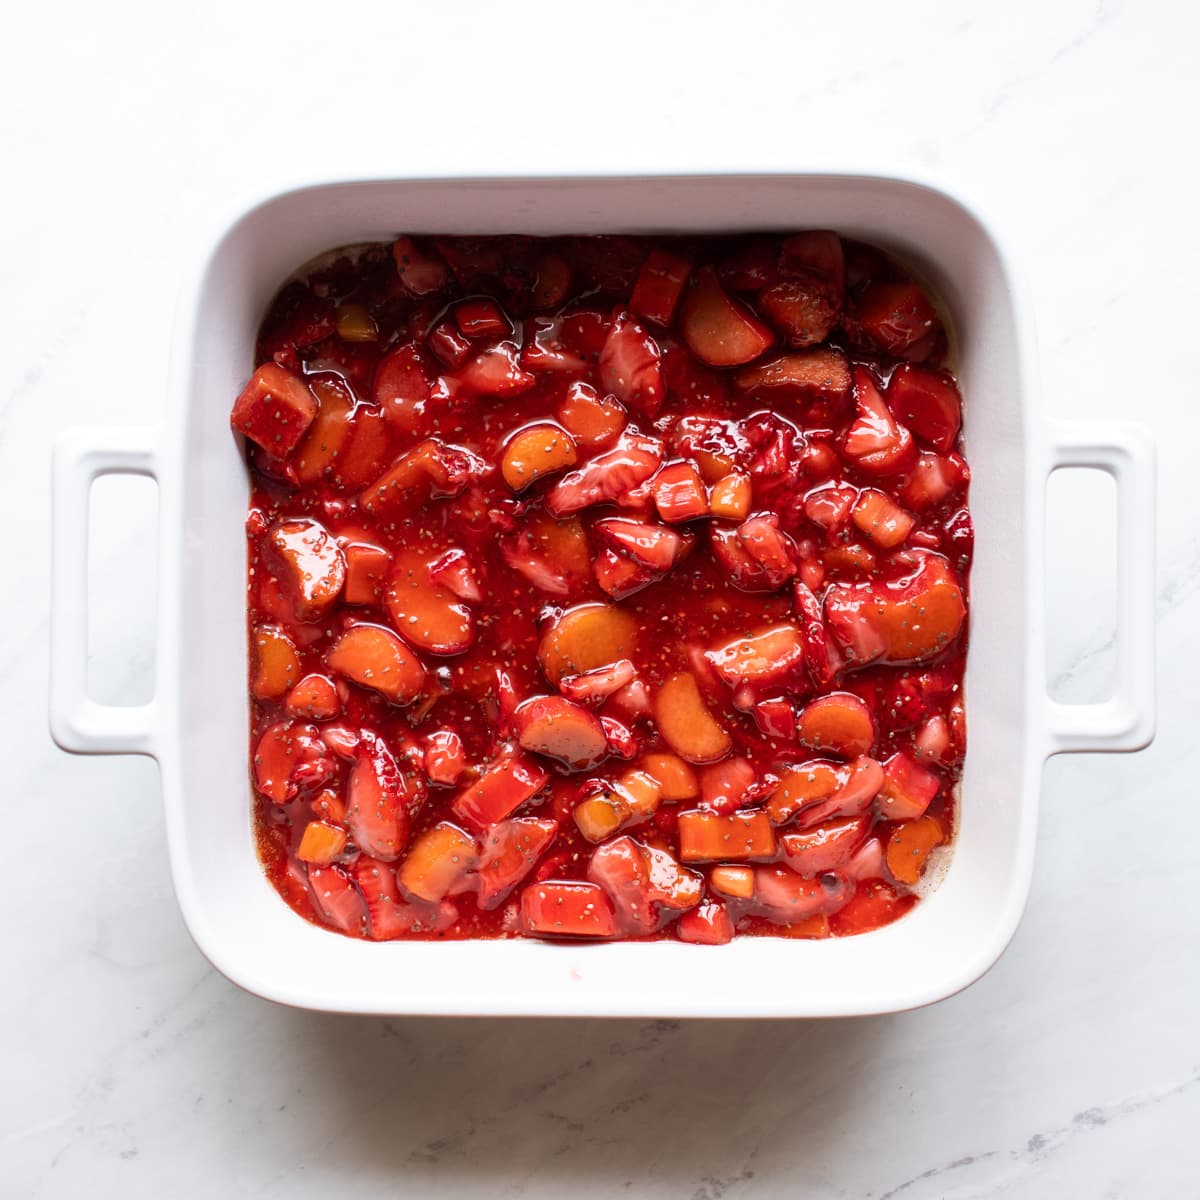 Syrupy strawberry rhubarb mixture has been transferred to a white baking dish coated with nonstick cooking spray.